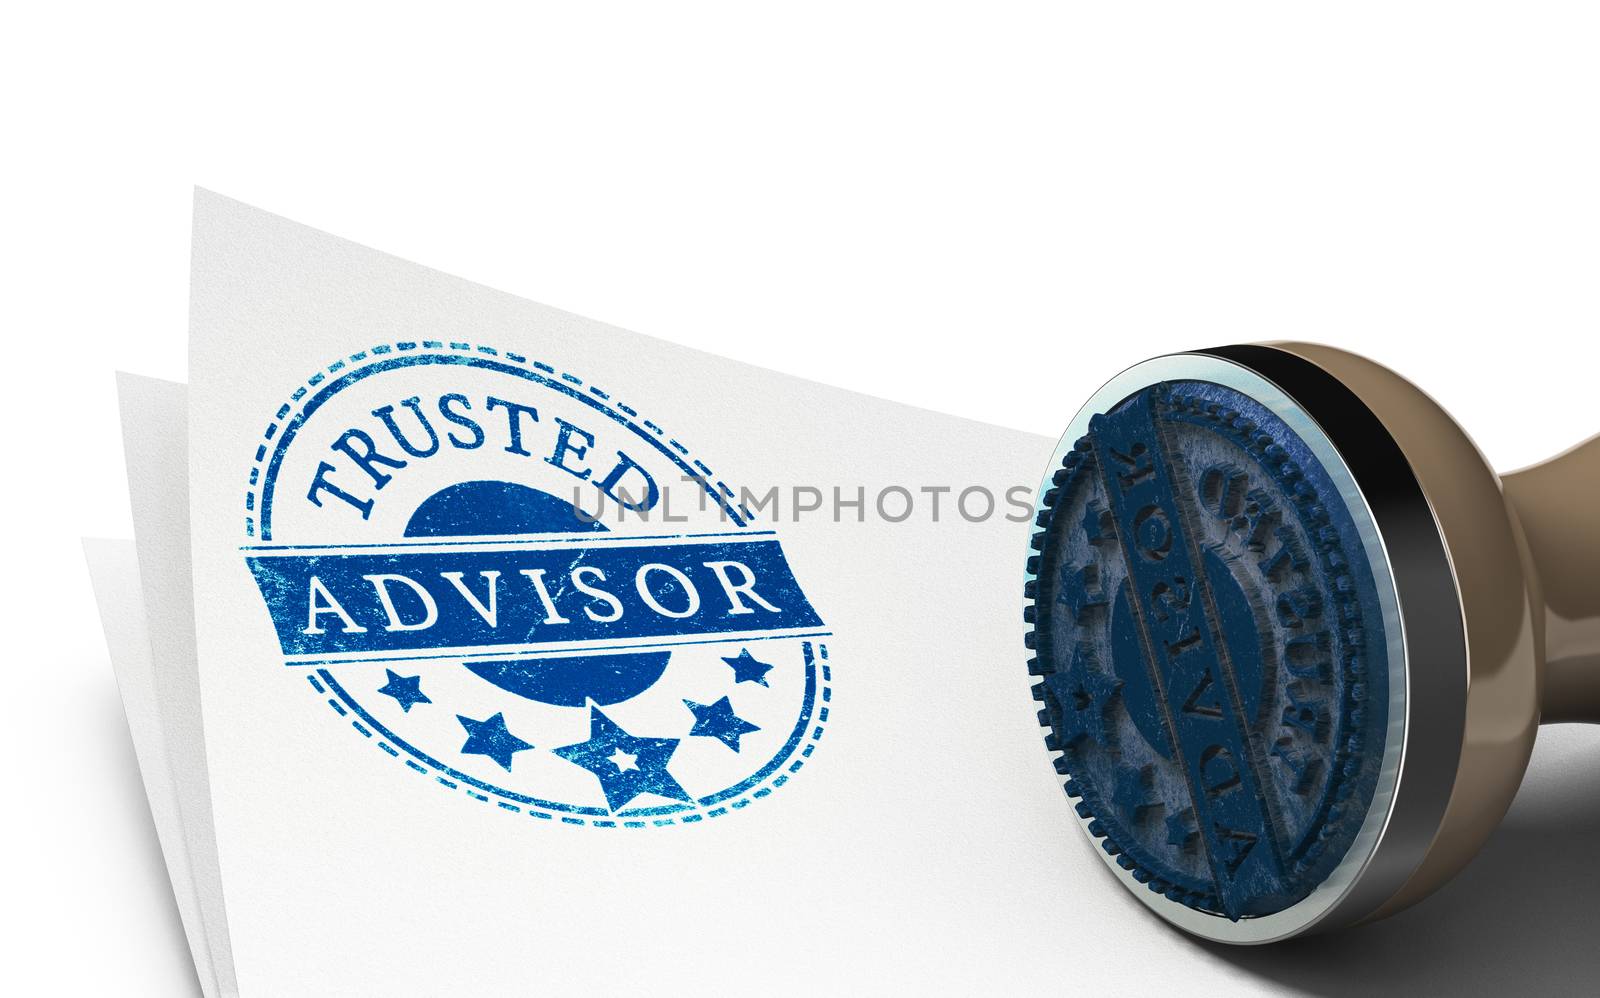 Advisor rubber stamp imprinted on a sheet of paper over white background. Concept of trust and business consulting.